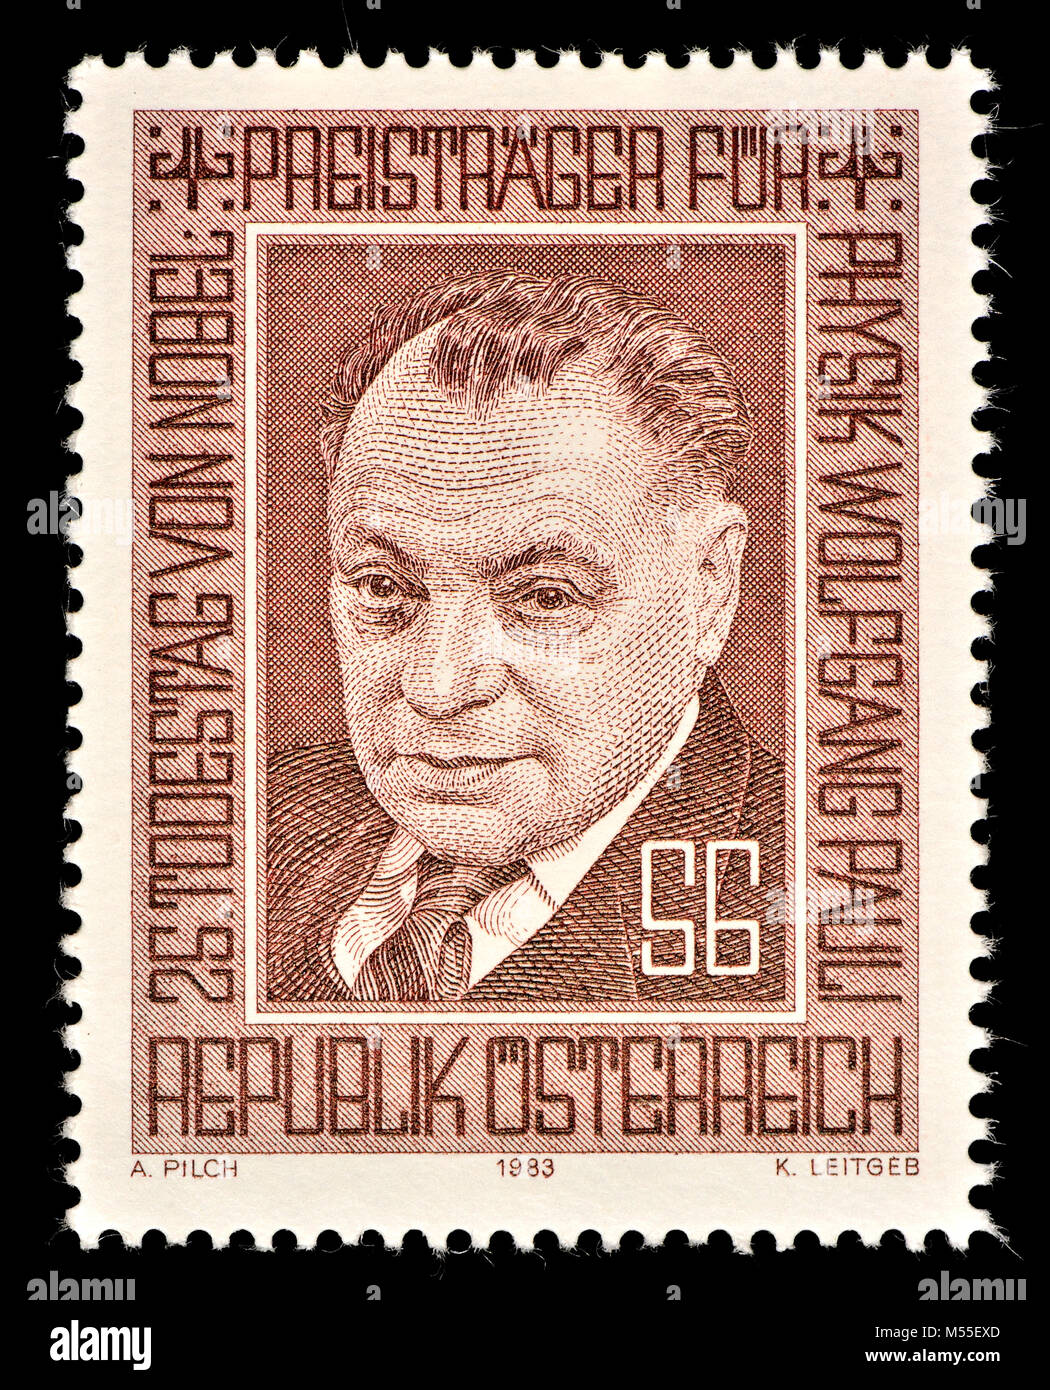 Austrian postage stamp (1983) : Wolfgang Ernst Pauli (1900 – 1958) Austrian-born Swiss theoretical physicist and one of the pioneers of quantum physic Stock Photo